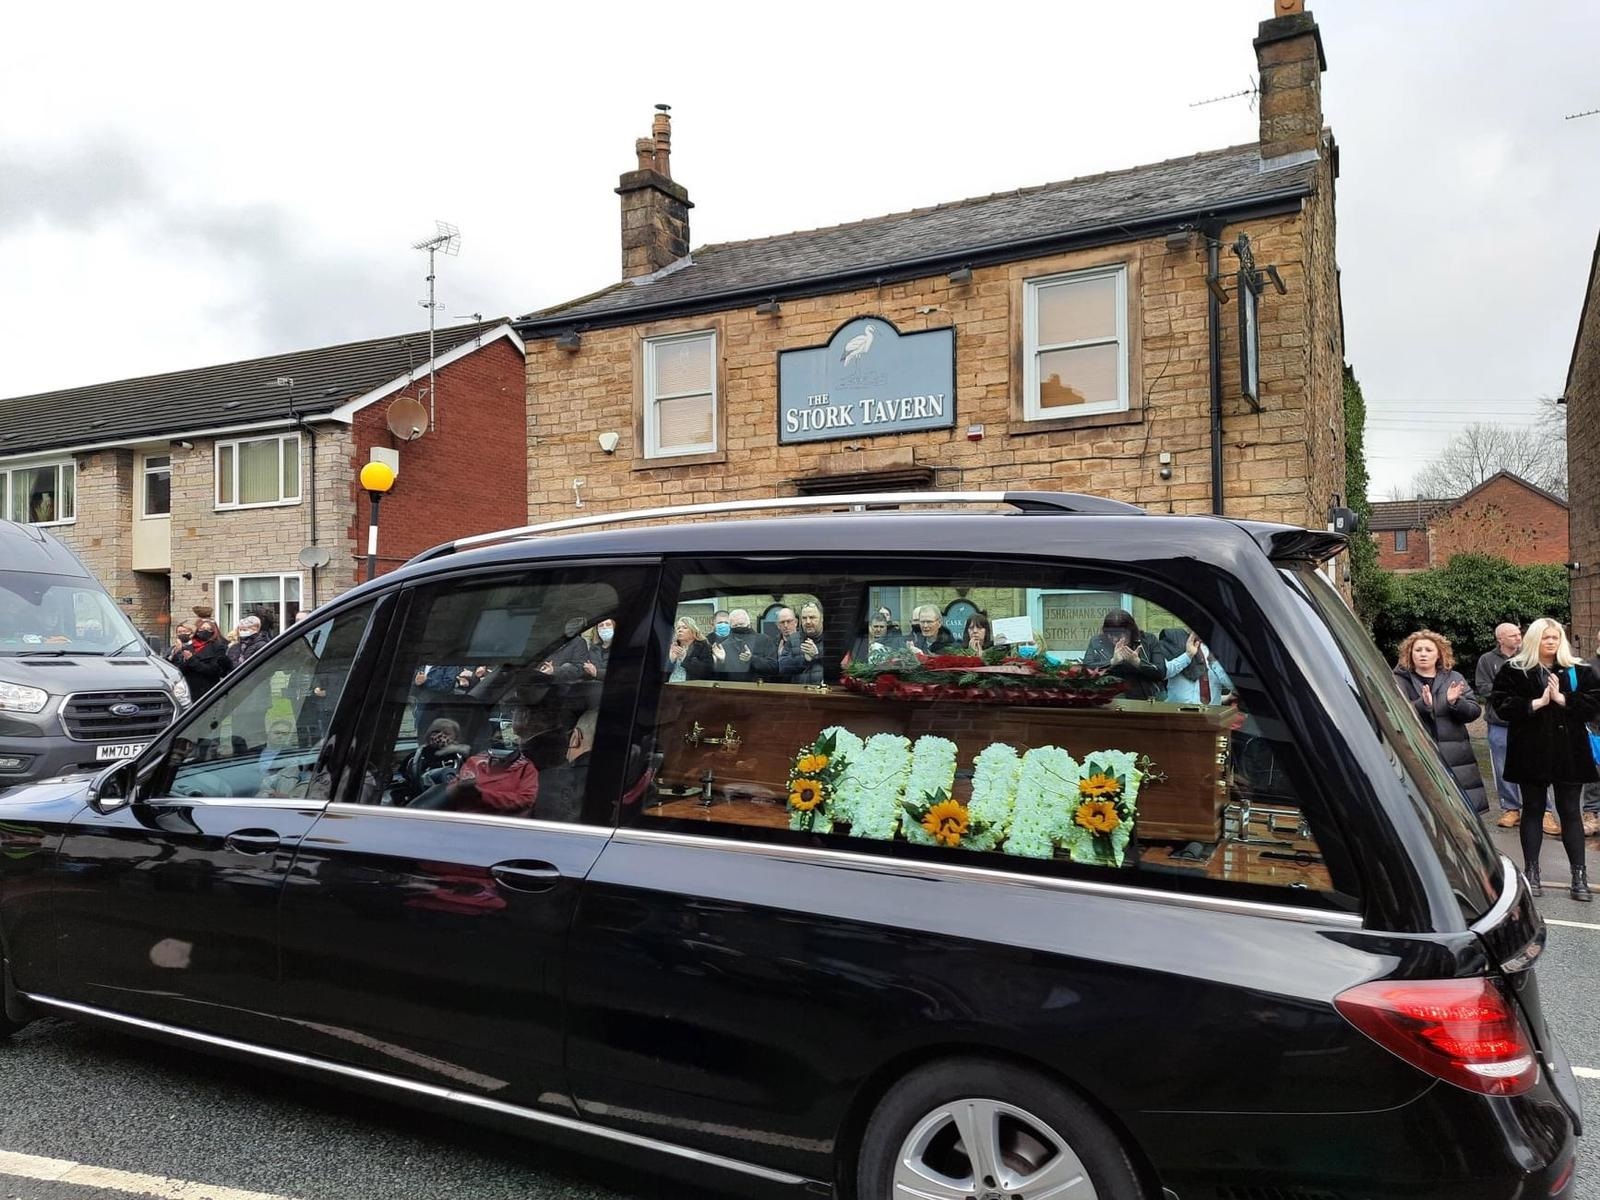 Jans coffin is carried by the funeral hearse outside The Stork Tavern in Halliwell